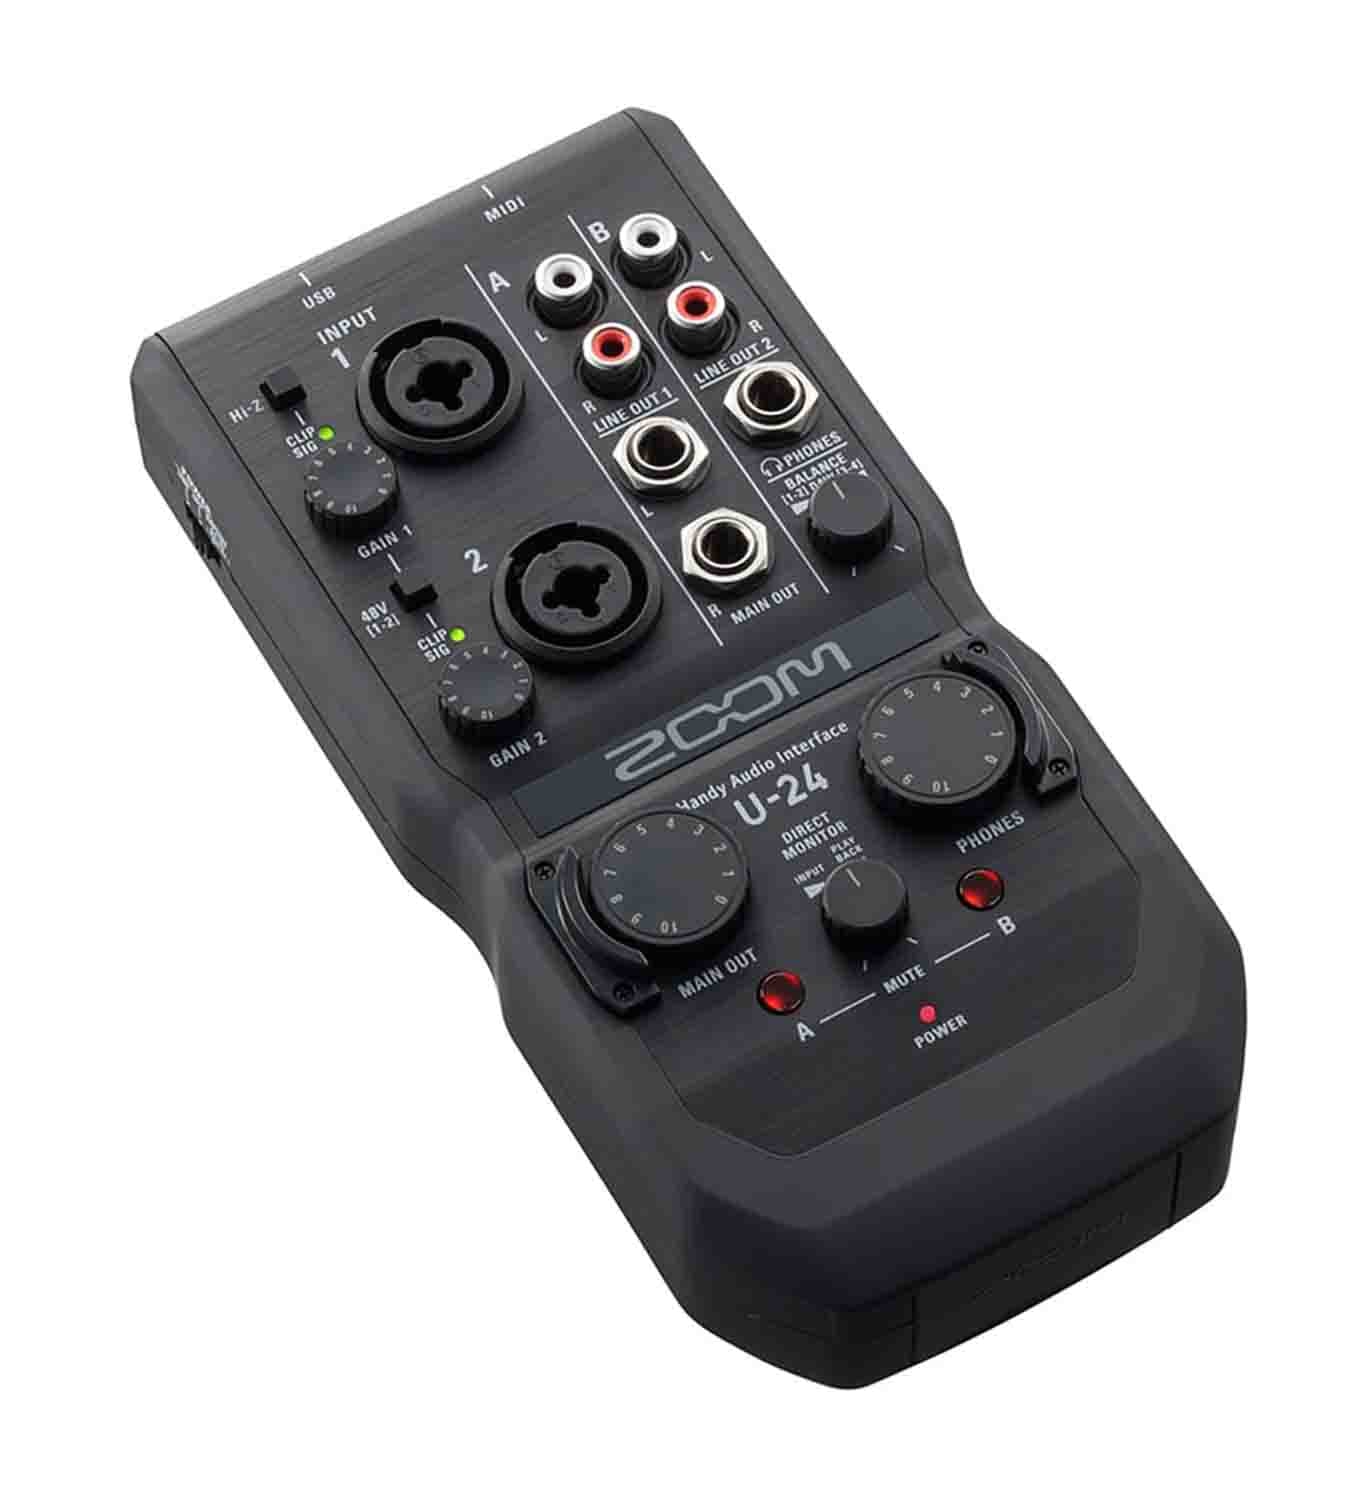 ZOOM U-24, 2-in 4-out Handy Audio Interface by Zoom